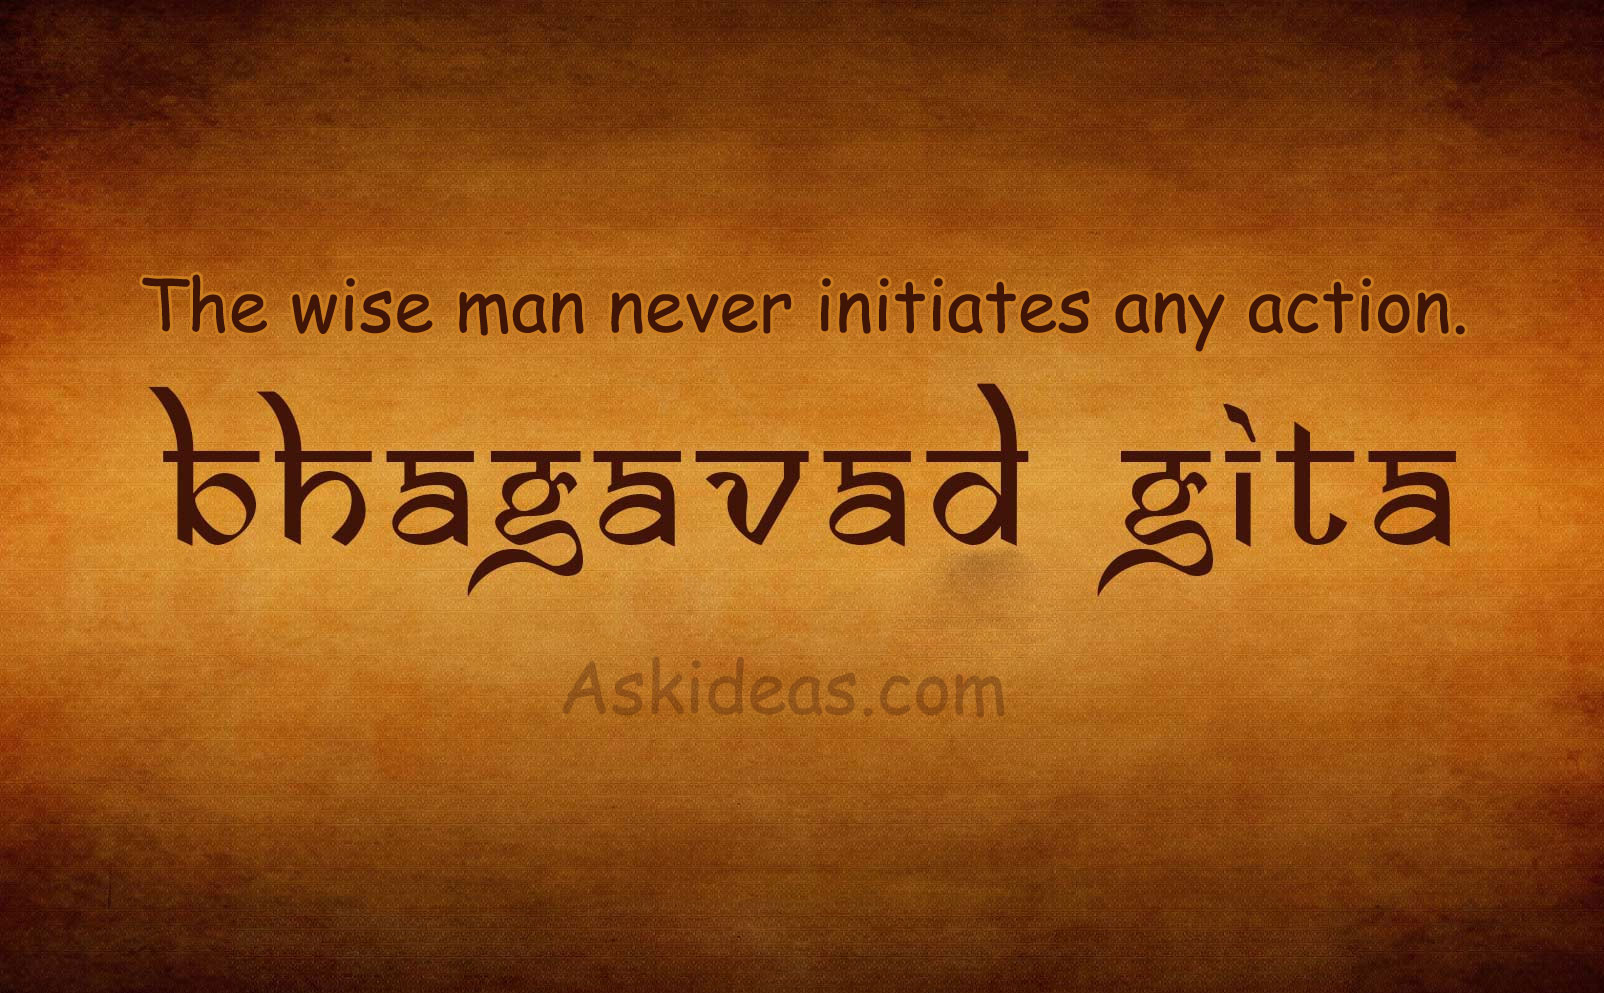 The wise man never initiates any action.